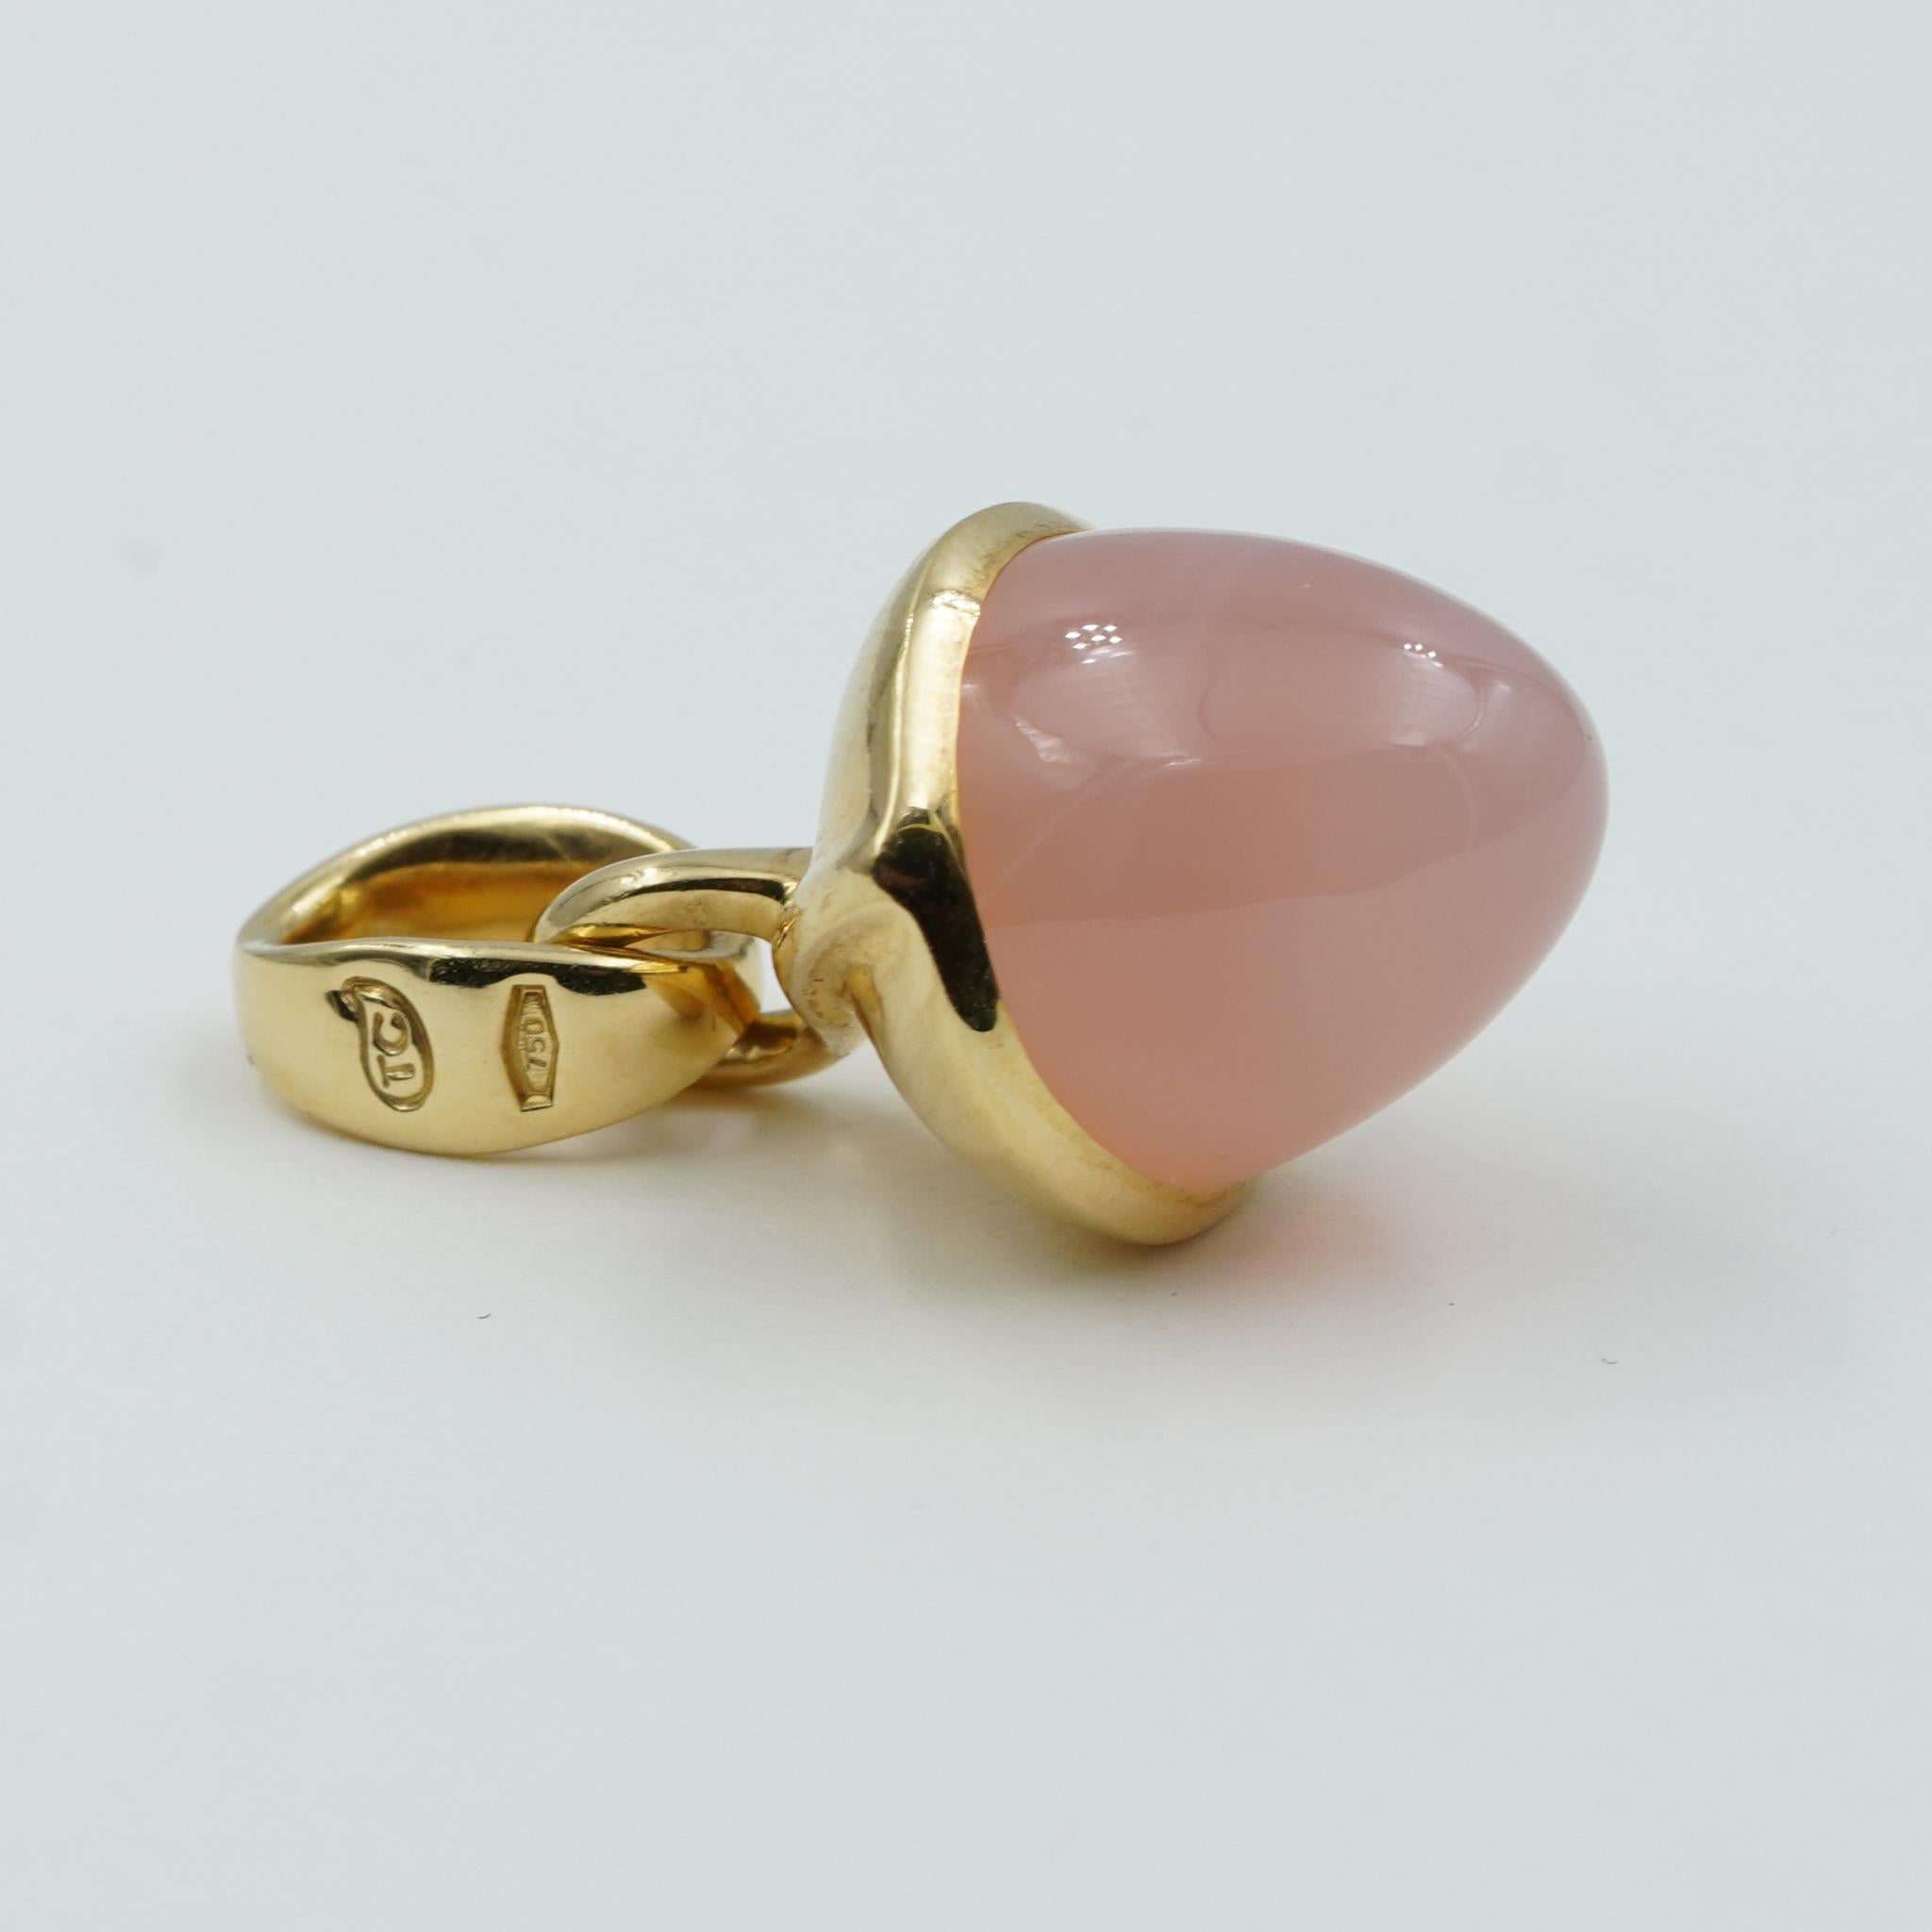 The iconic Mikado Bouquet pendant features a beautiful pink Chalcedony in Tamara Comolli's classic acorn shape. Set in 18K gold, this medium-sized pendant is available in a range of beautiful gemstone combinations... Start collecting today! Perfect